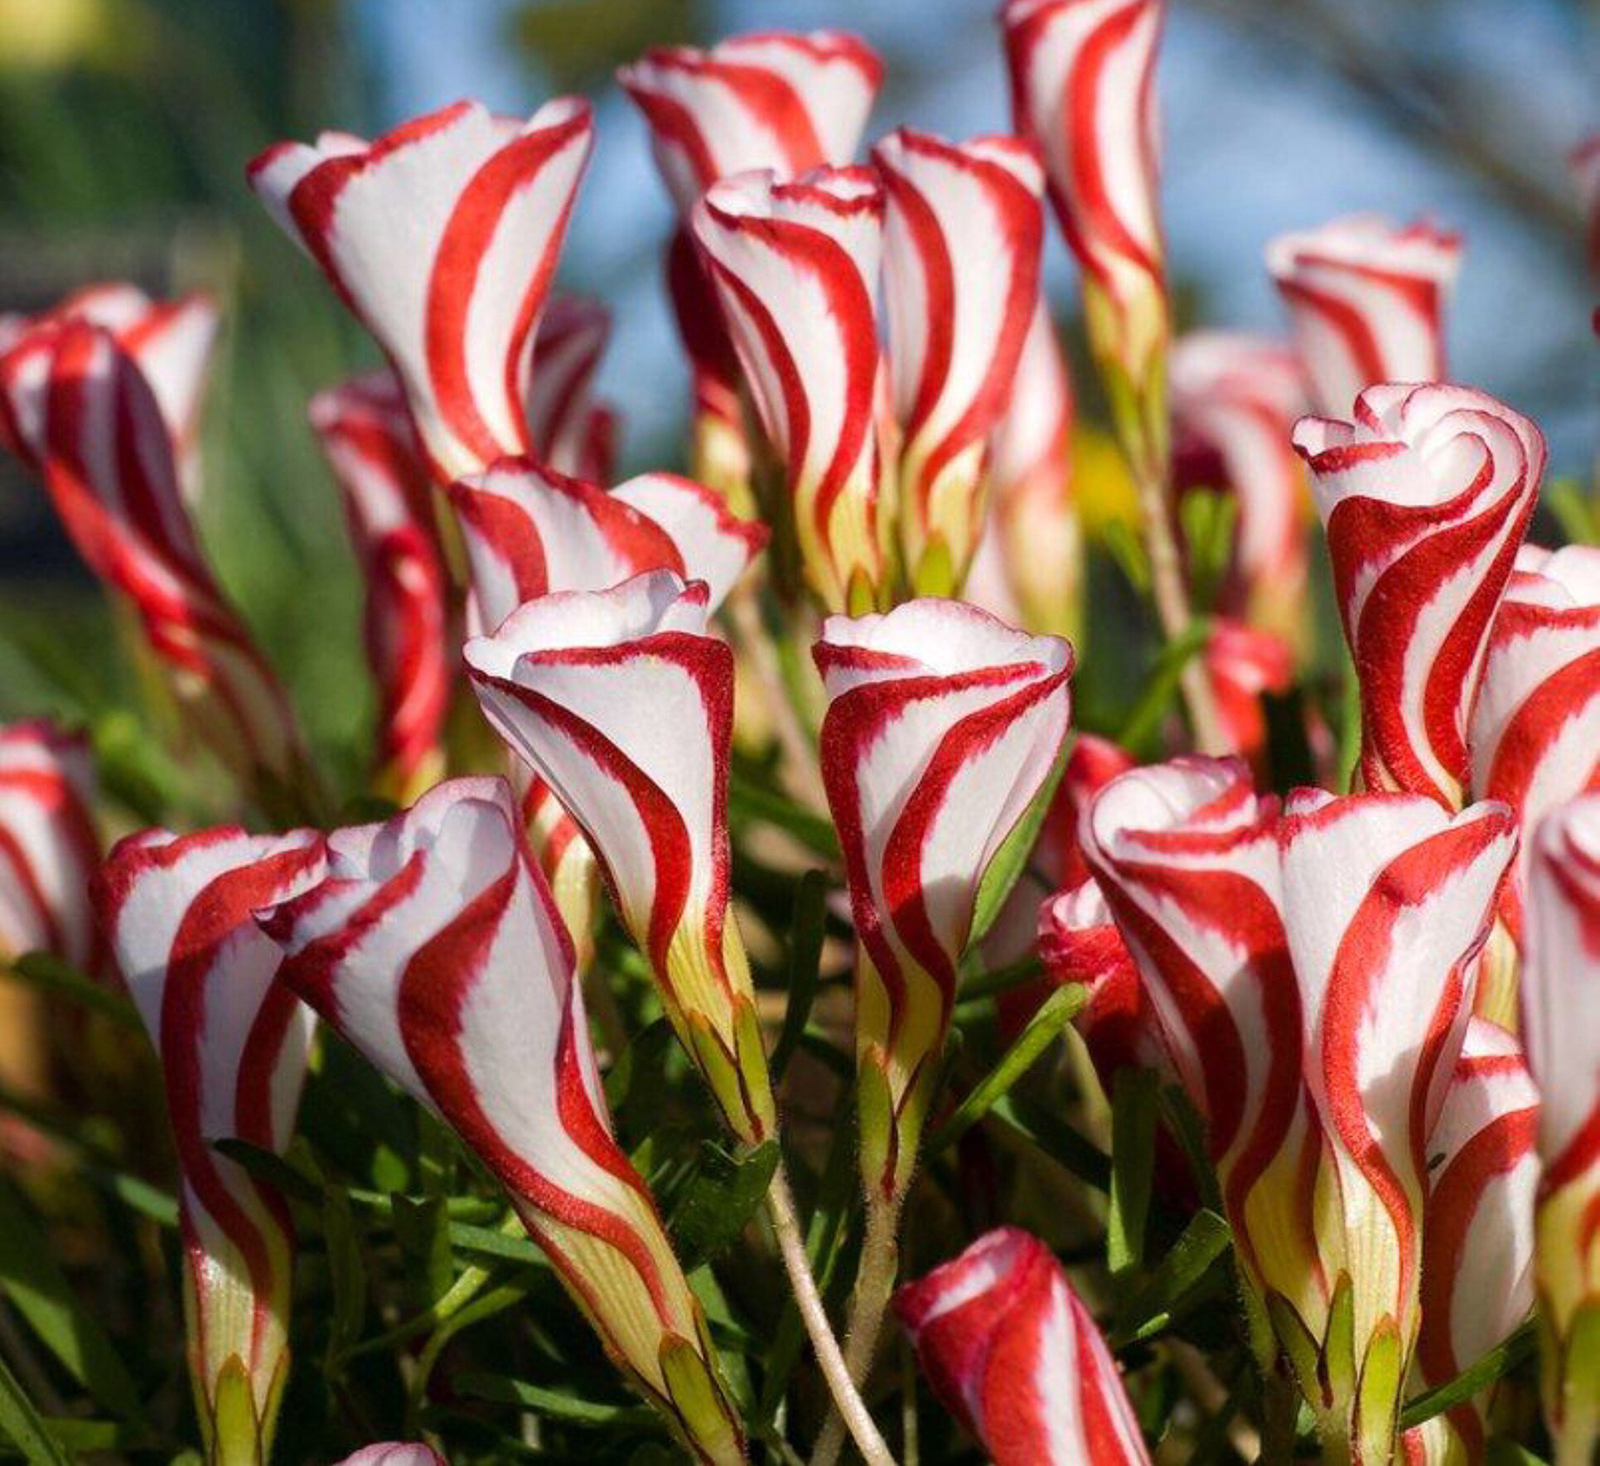 Candy cane oxalis flowers are red and white, hence the name. In early spring, trumpet shaped blooms appear, even on young plants. Gardeners in some areas may find blooms on the plant in late winter. Flowers of the candy cane oxalis plant appear white once the trumpets have opened, as the red stripe is on the bottom of the petal. Buds of the candy cane oxalis often close at night and in cool weather to again reveal the candy cane stripes.